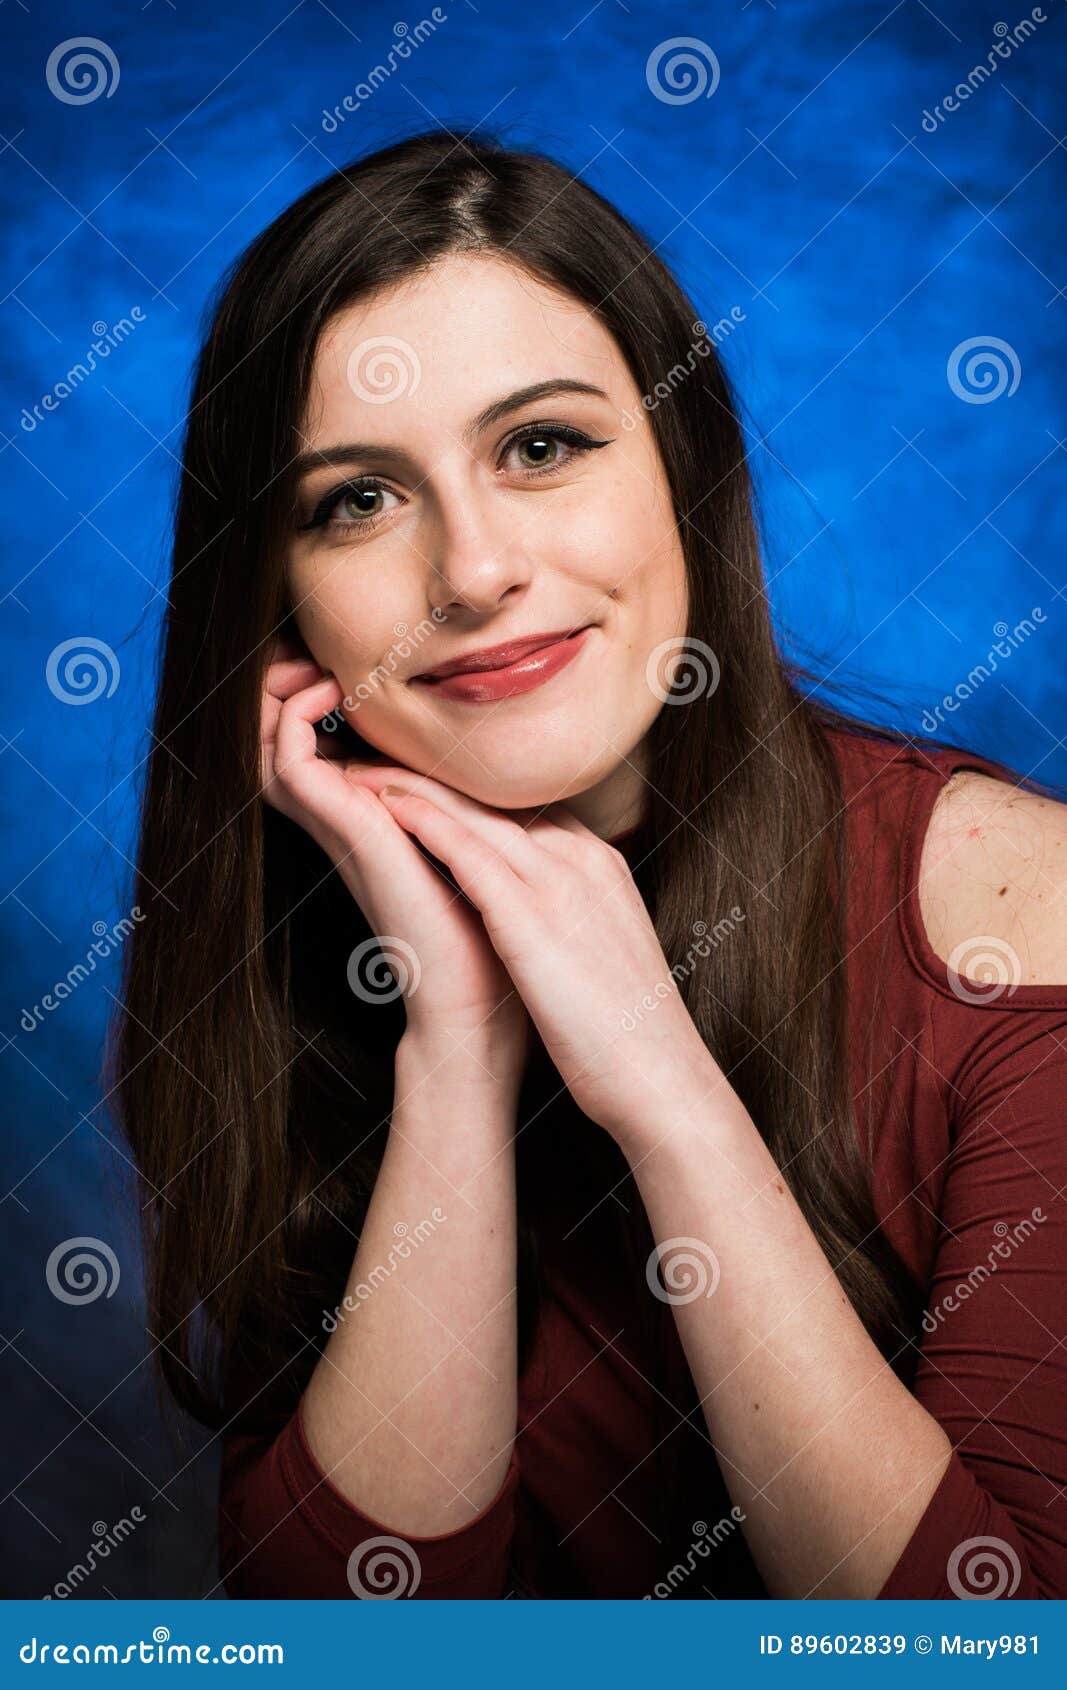 Formal Pose Stock Photos - 145,265 Images | Shutterstock